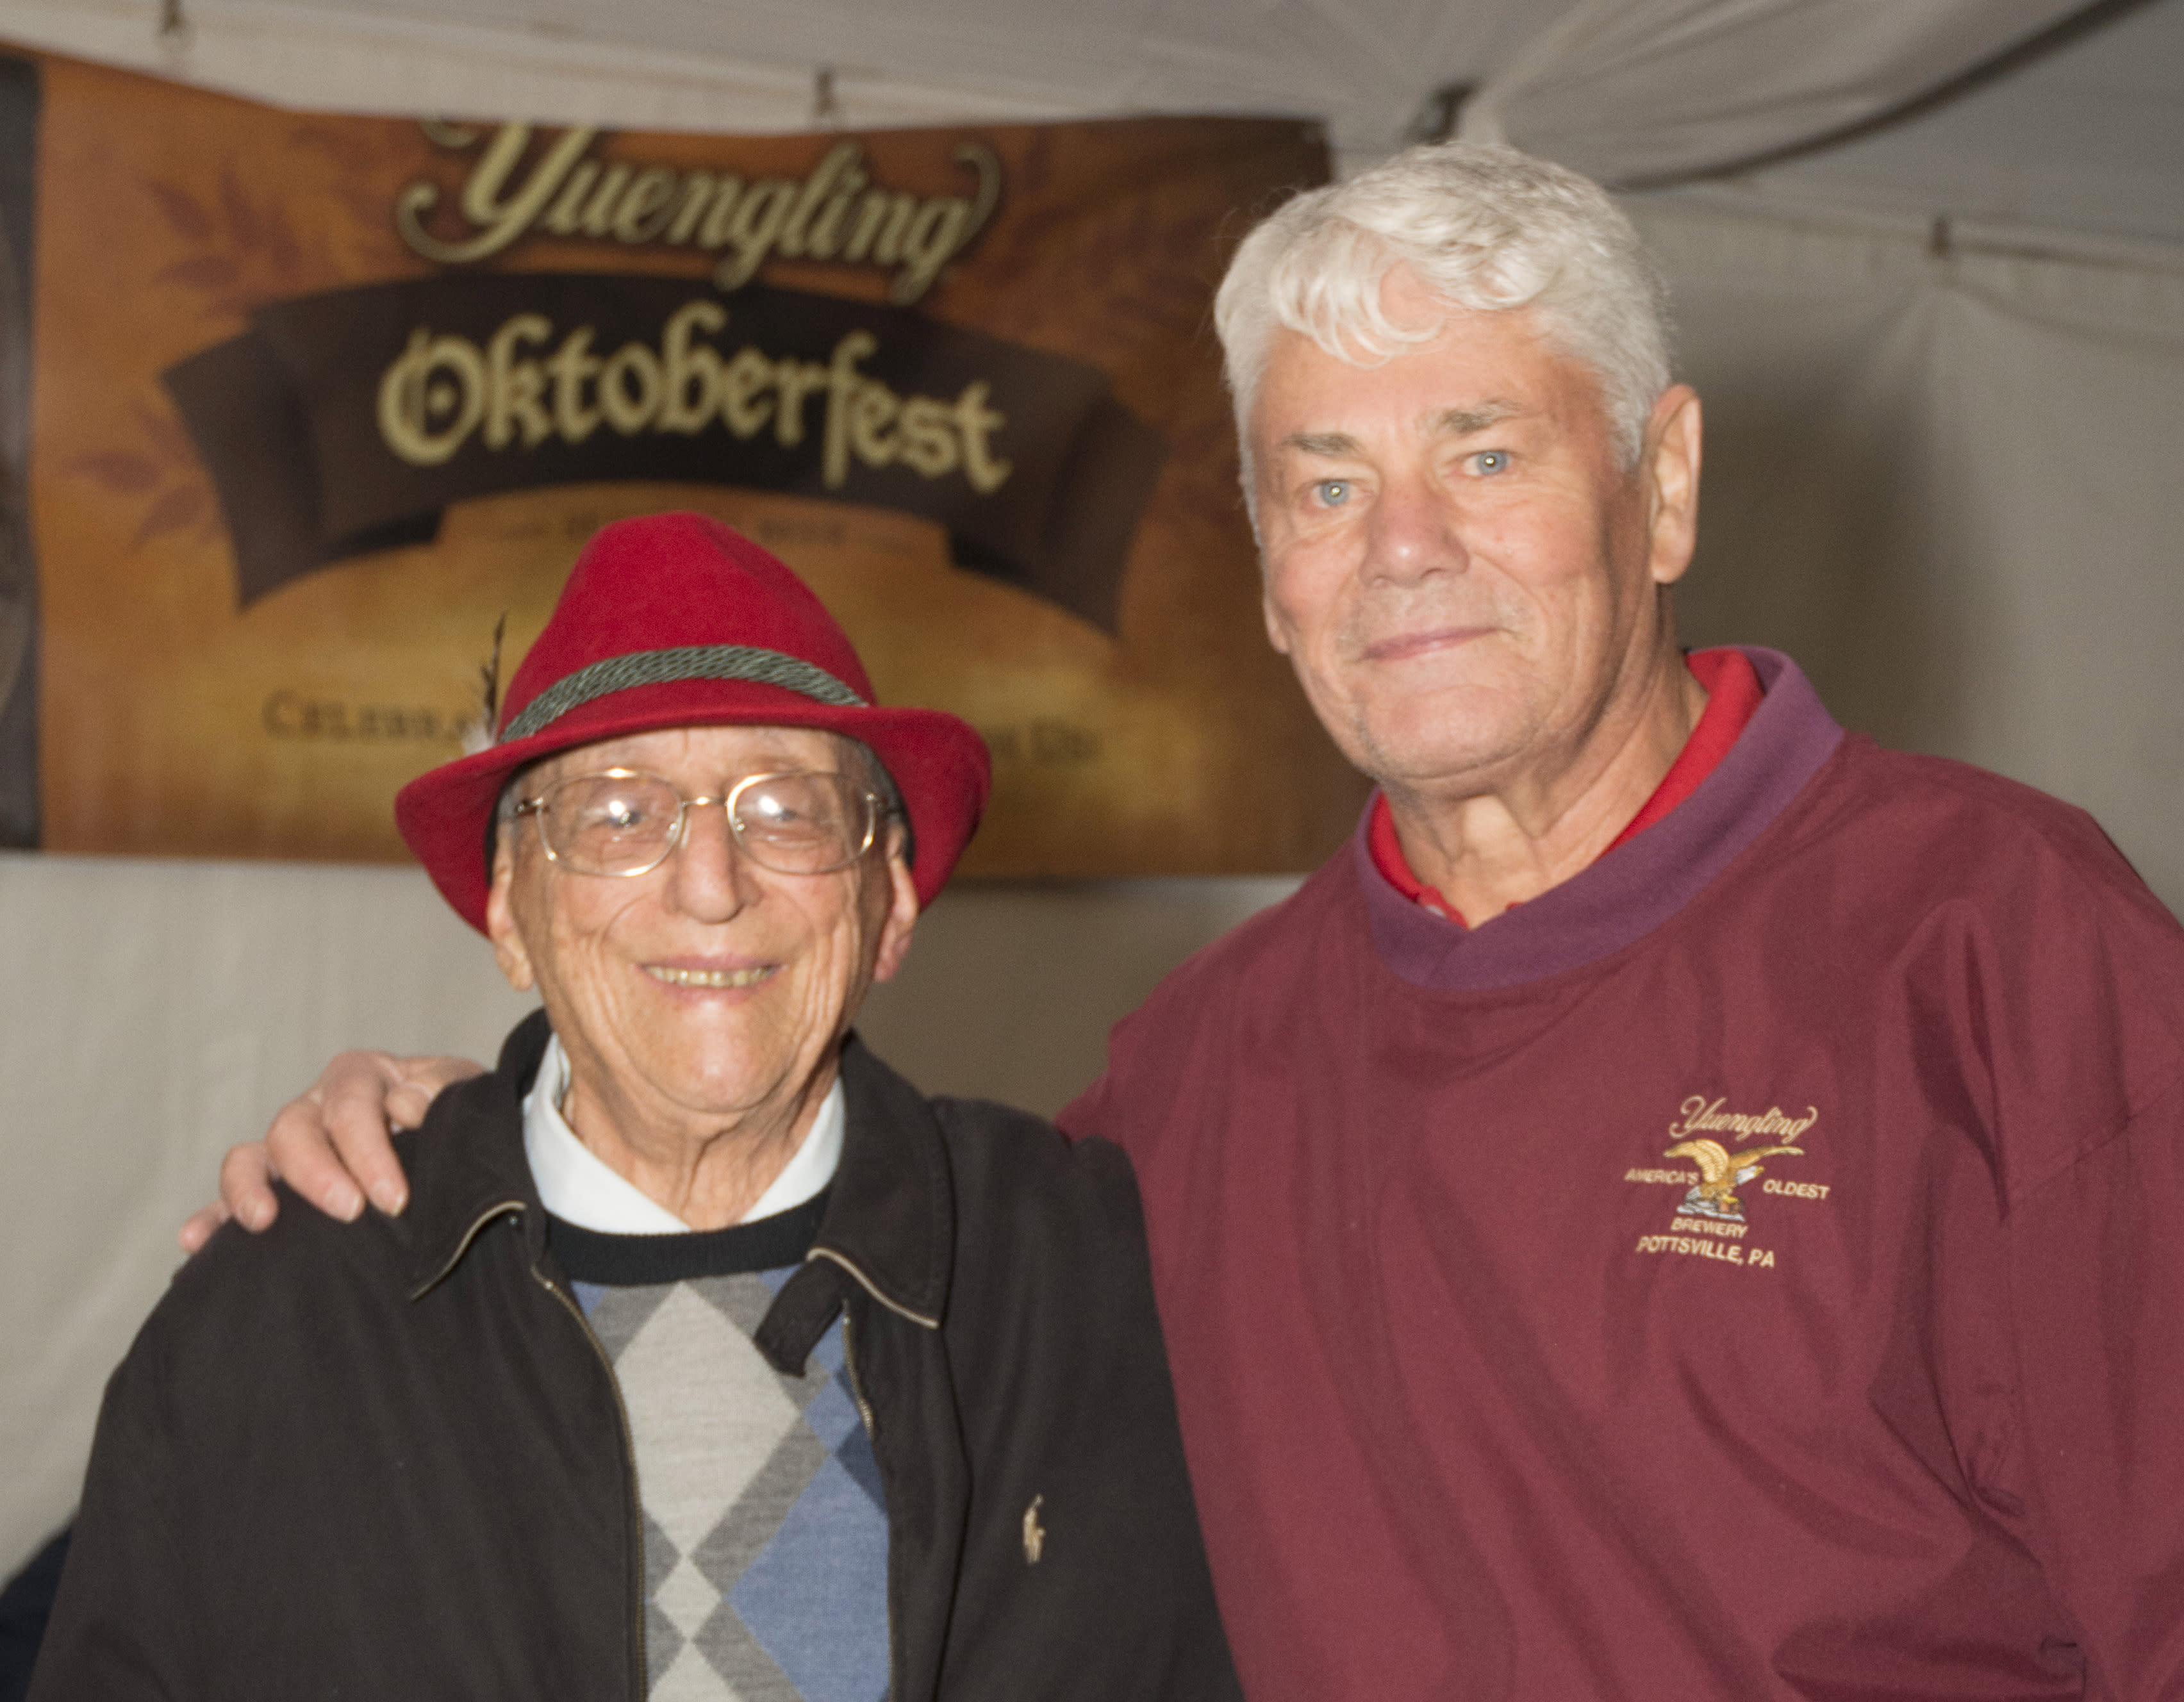 Mr. Oktoberfest, Gus Trapasso, with Dick Yuengling